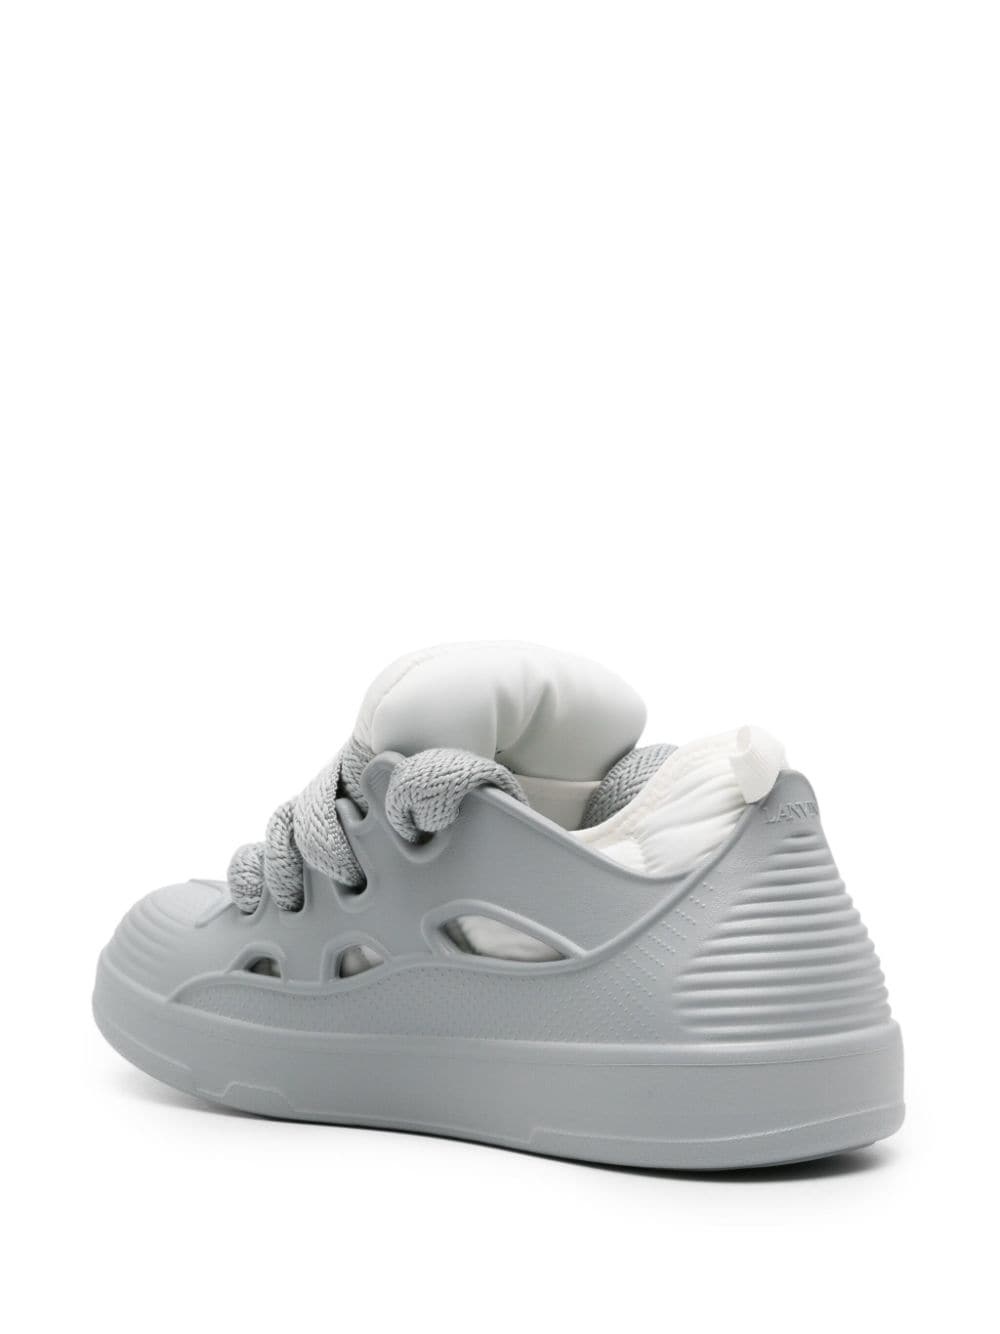 Curb interchangeable-liners sneakers - 3